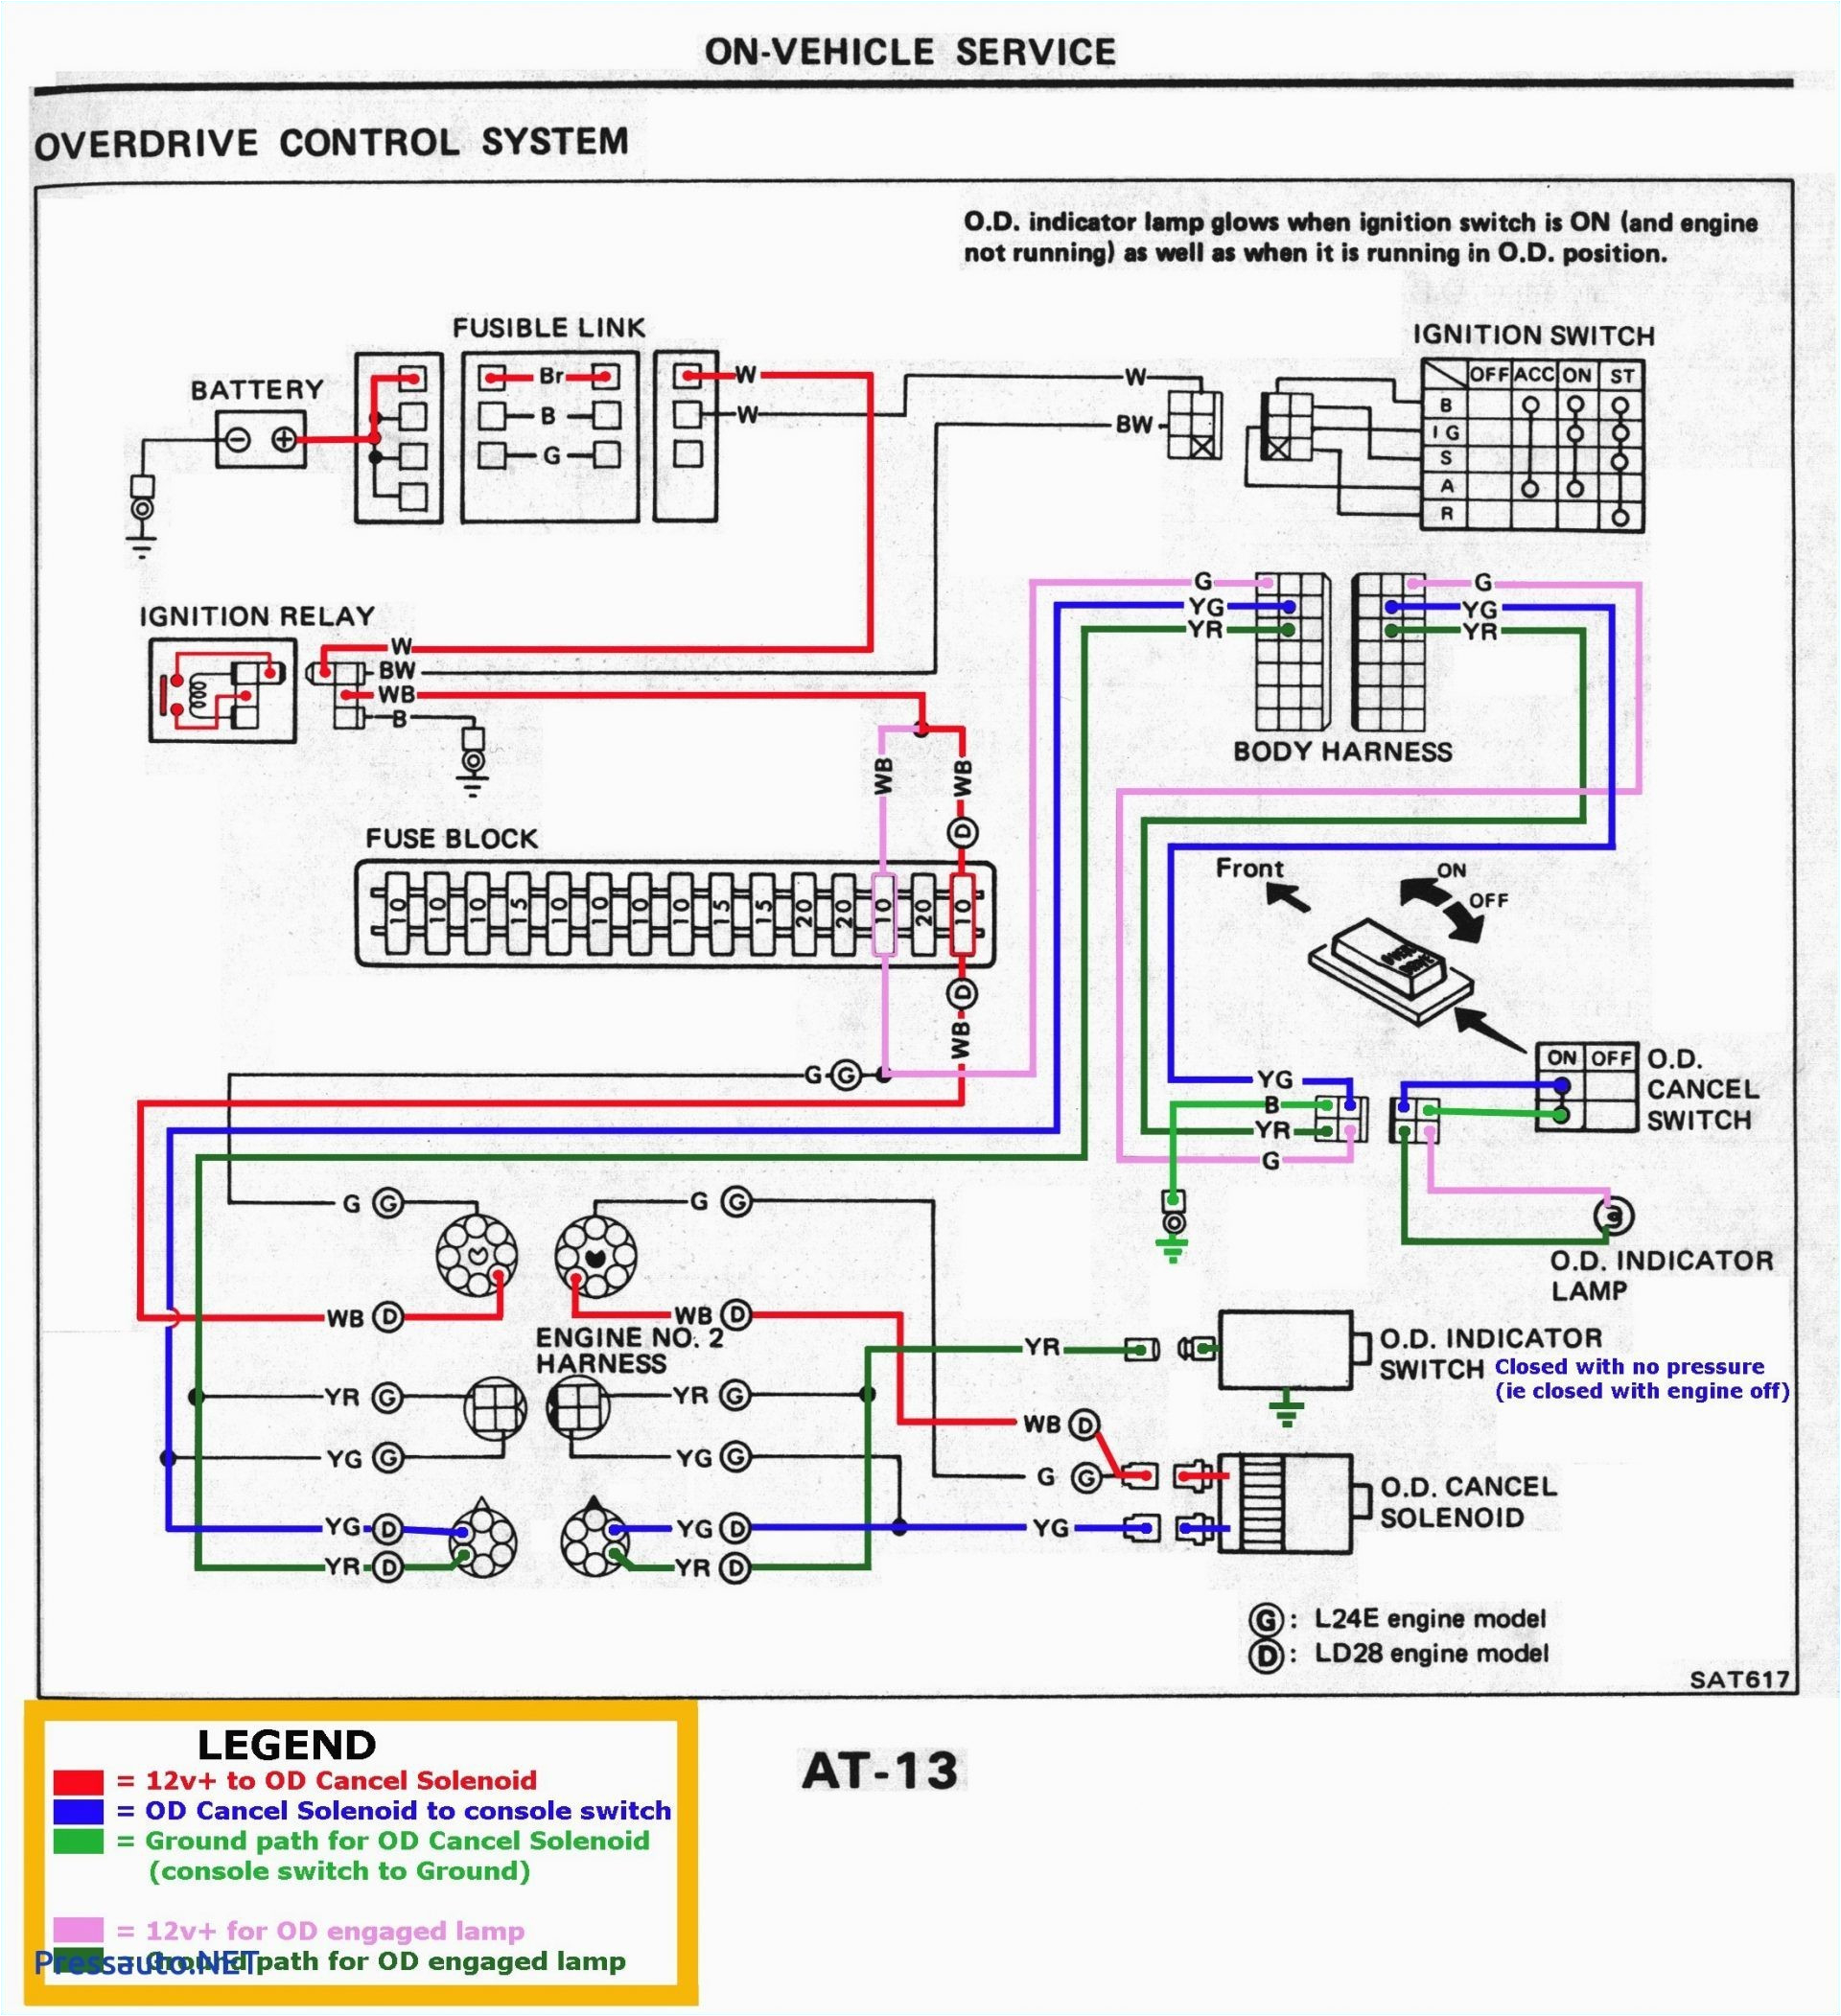 American Auto Wire Diagrams Mirrors ford Wiring Color Codes Wiring Diagram Dash